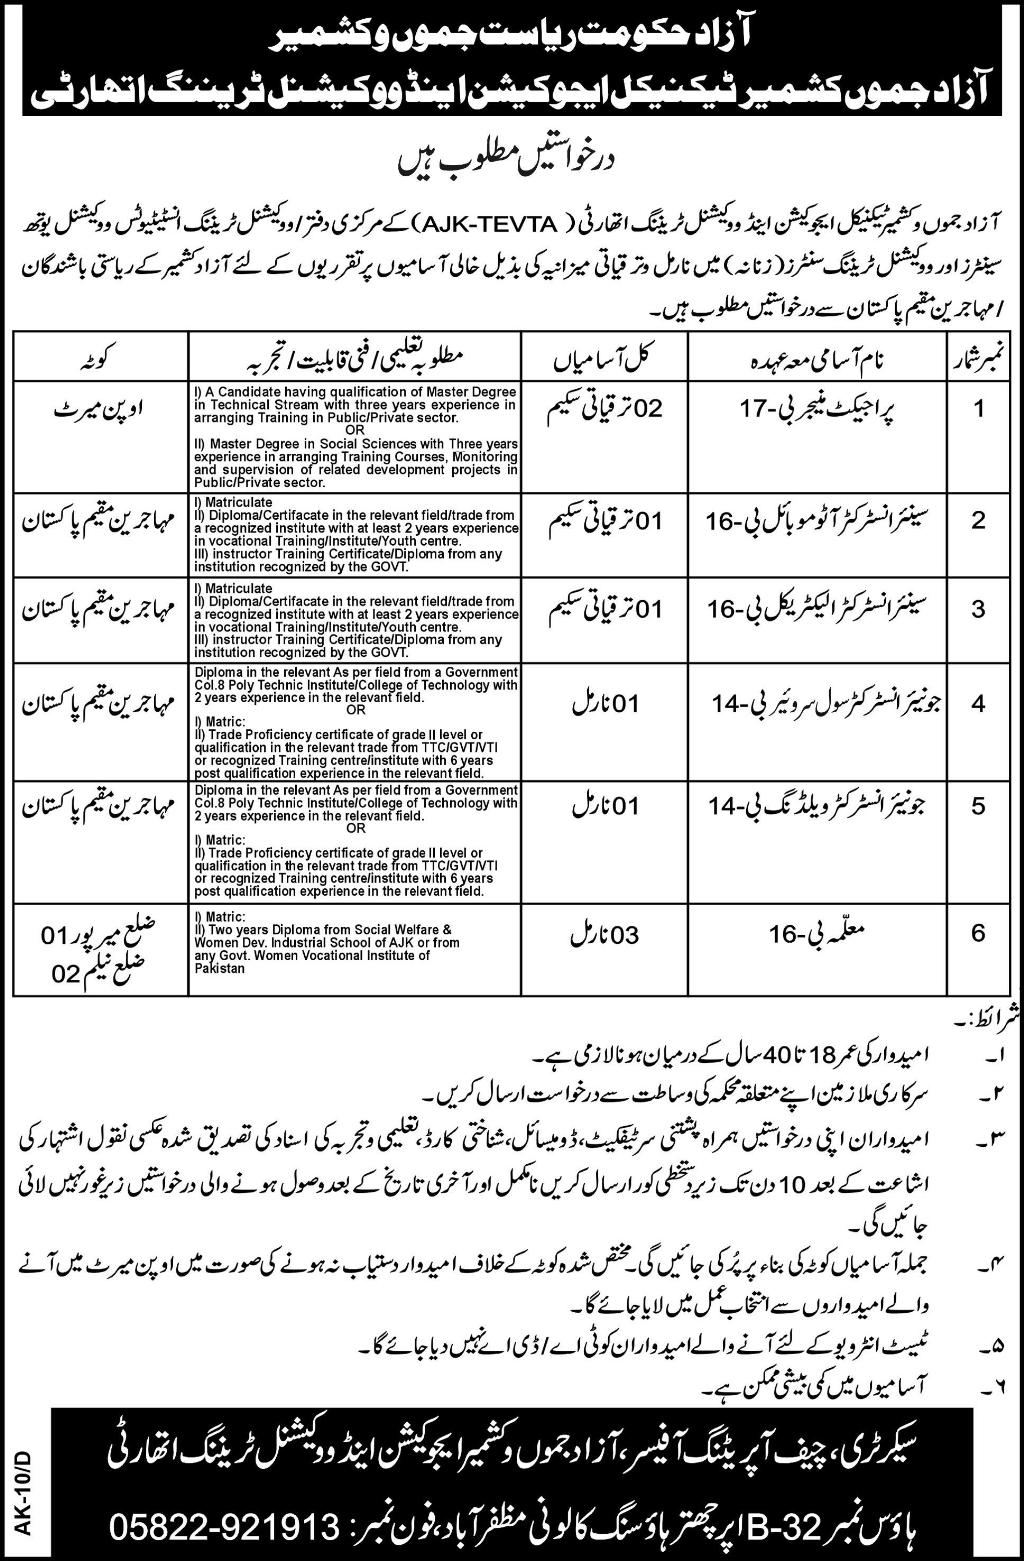 Instructors and Project Manager Required Under AJK-TEVTA at Vocational Training Institutes (Government Job)